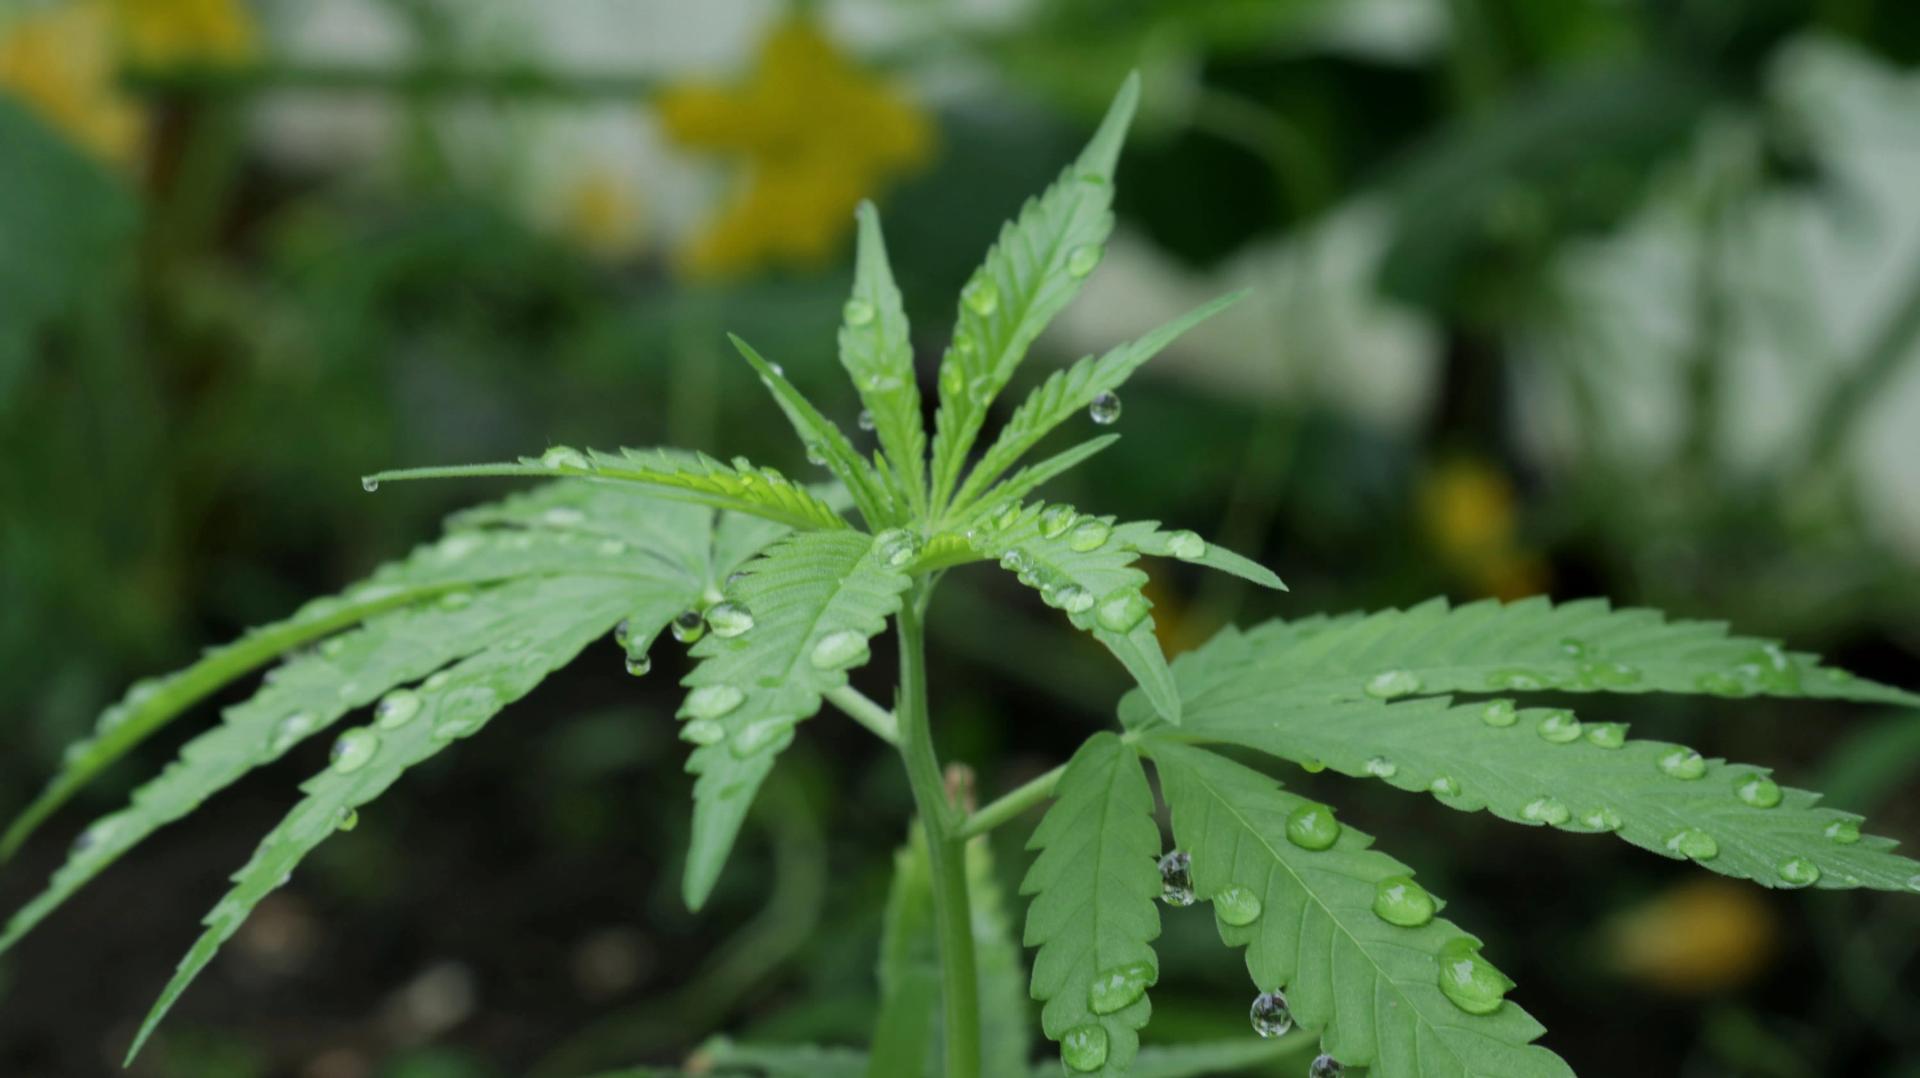 young-cannabis-plant-in-water-droplets-2021-09-04-10-18-55-utc-min.jpg